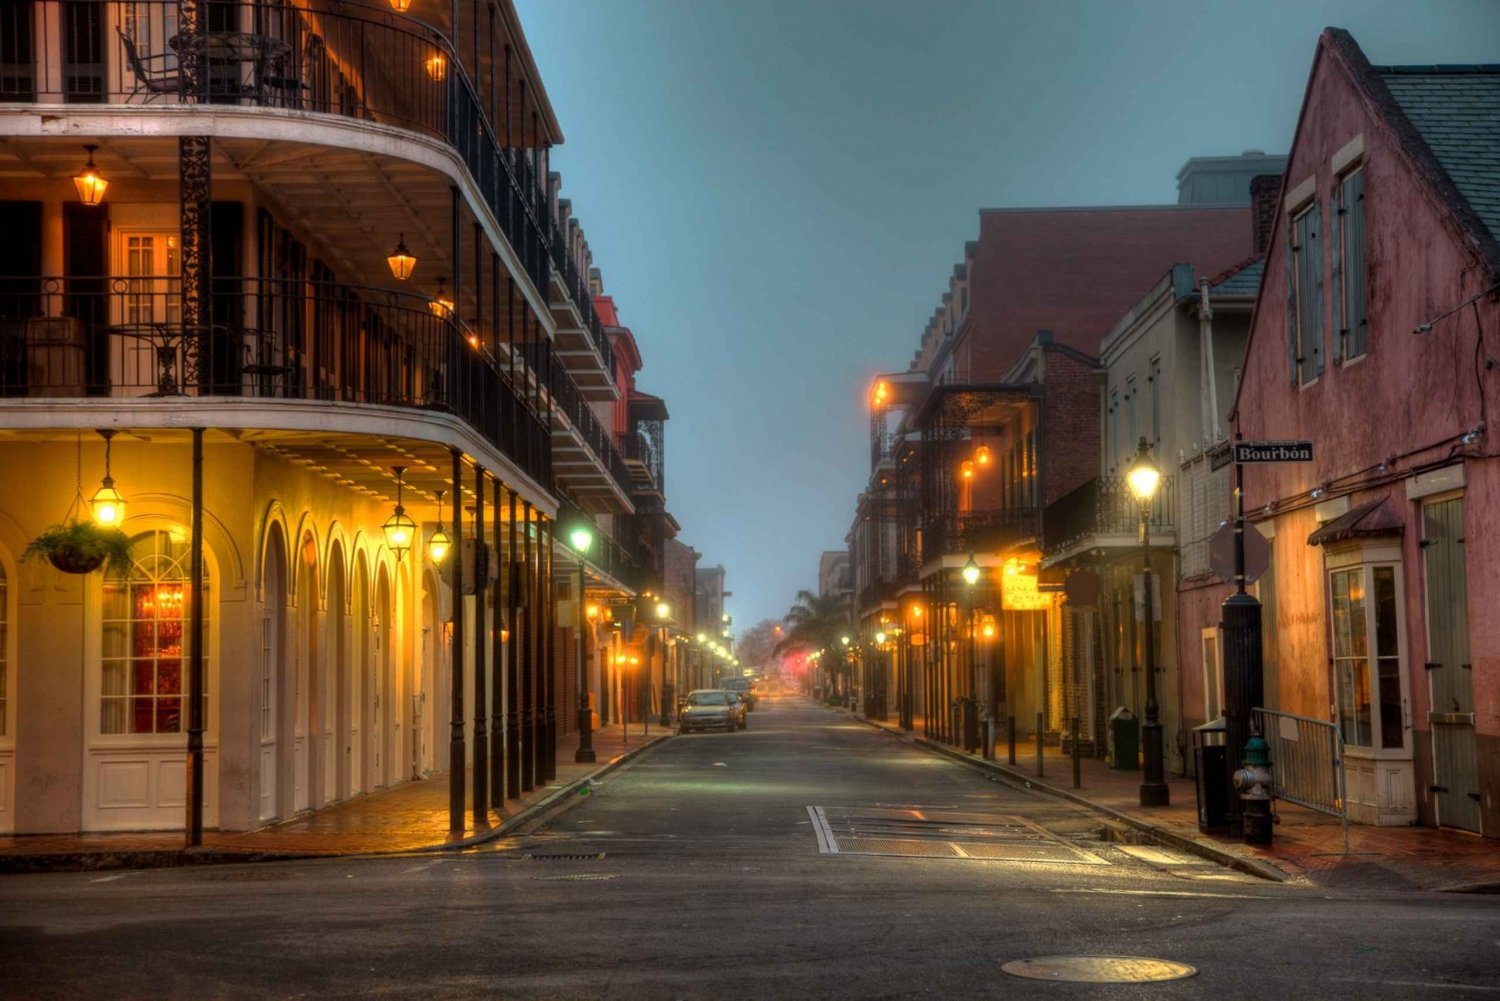 New Orleans: 1.5-Hour Vampire Tour of the French Quarter